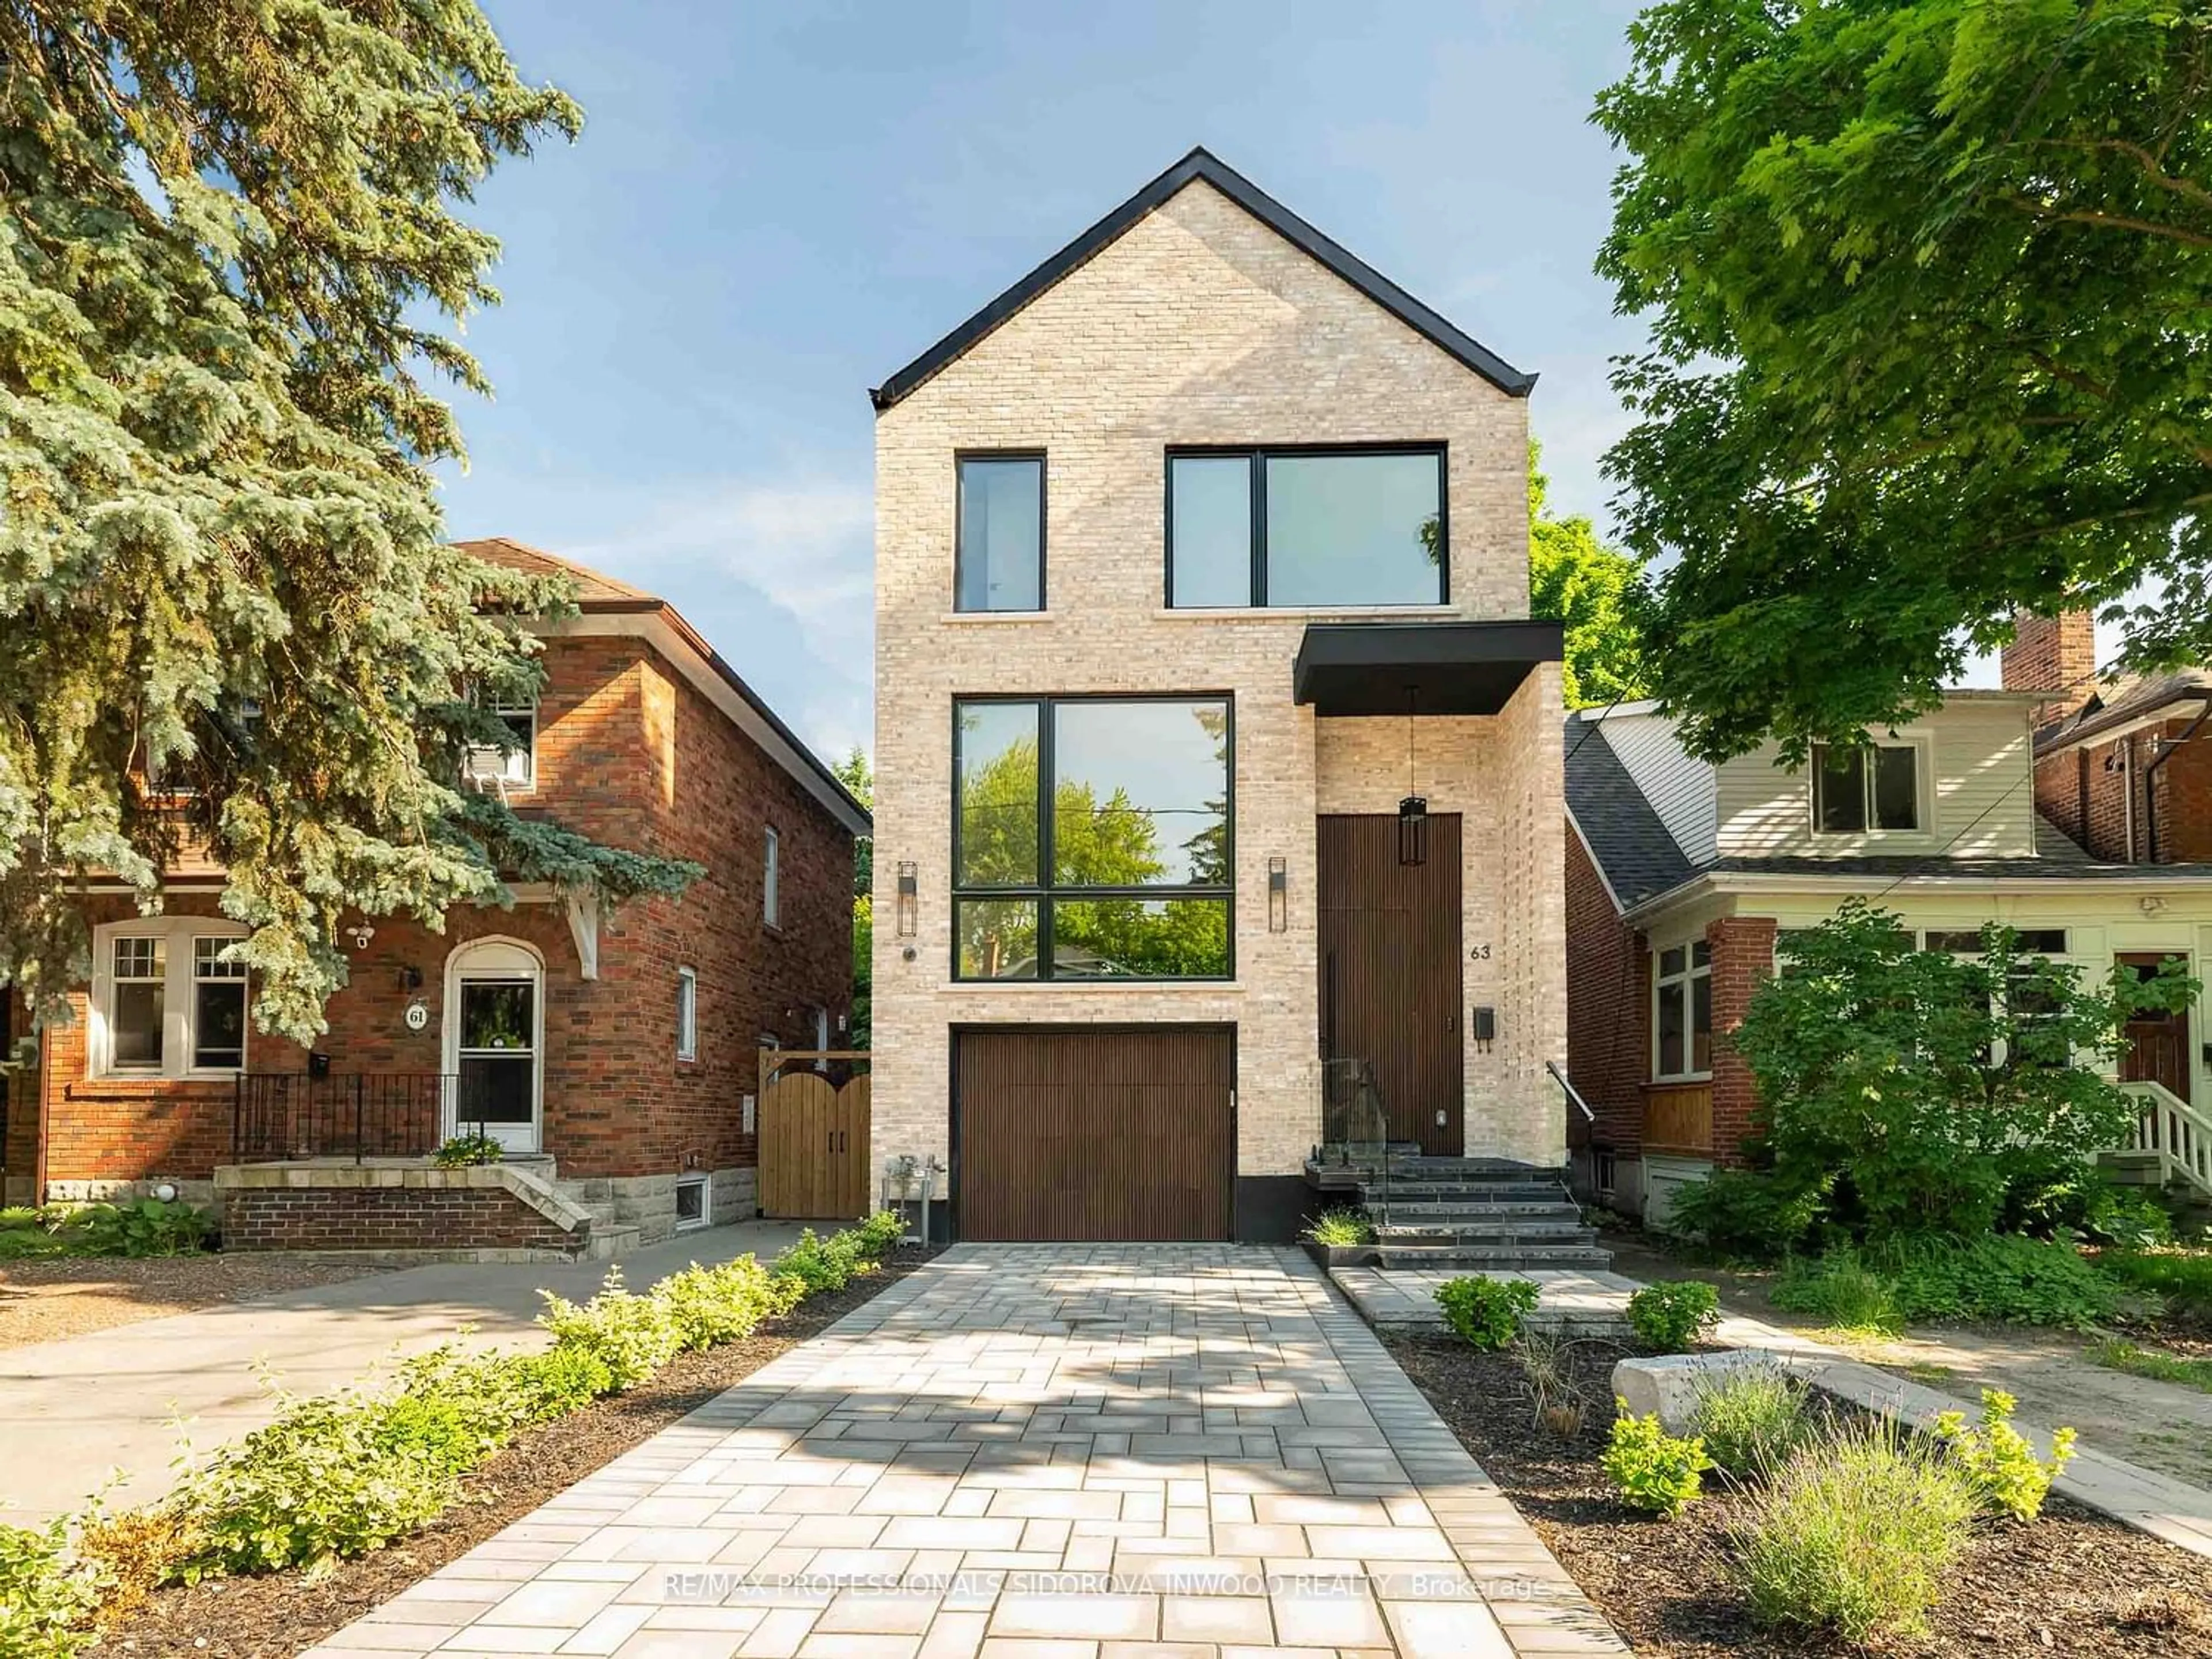 Home with brick exterior material for 63 Methuen Ave, Toronto Ontario M6S 1Z7